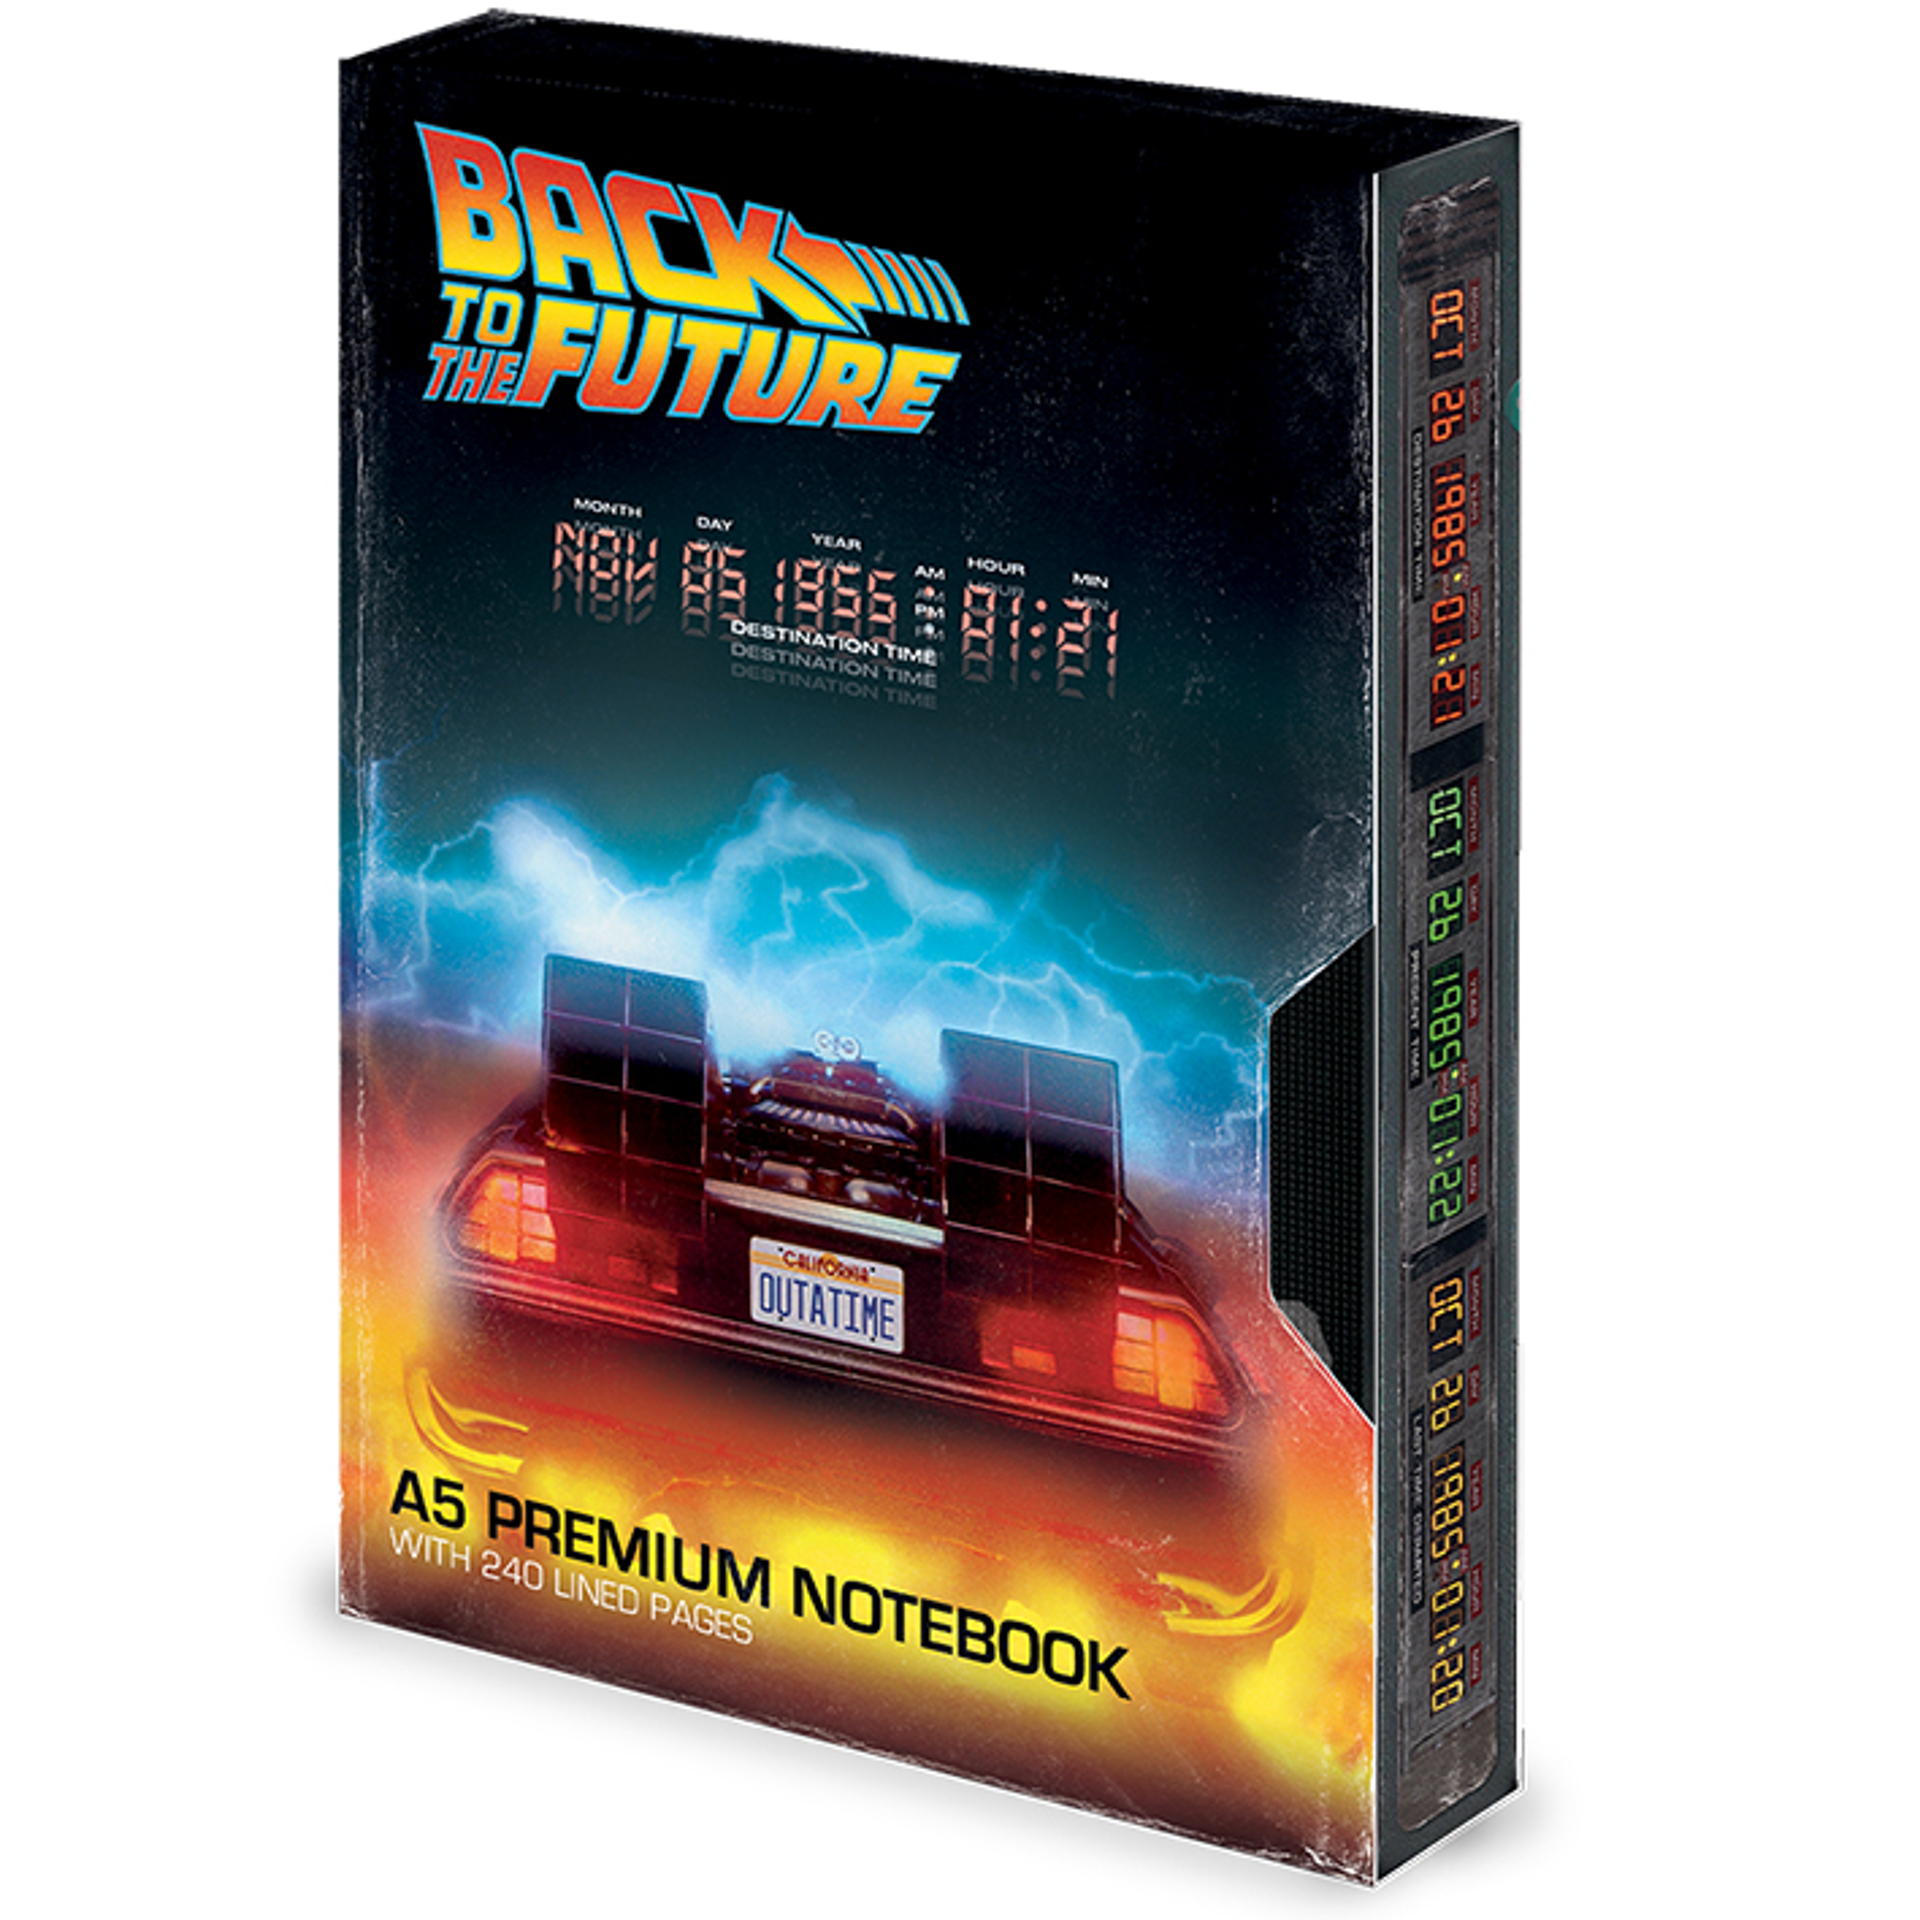 Back to the Future - VHS A5 Premium Notebook